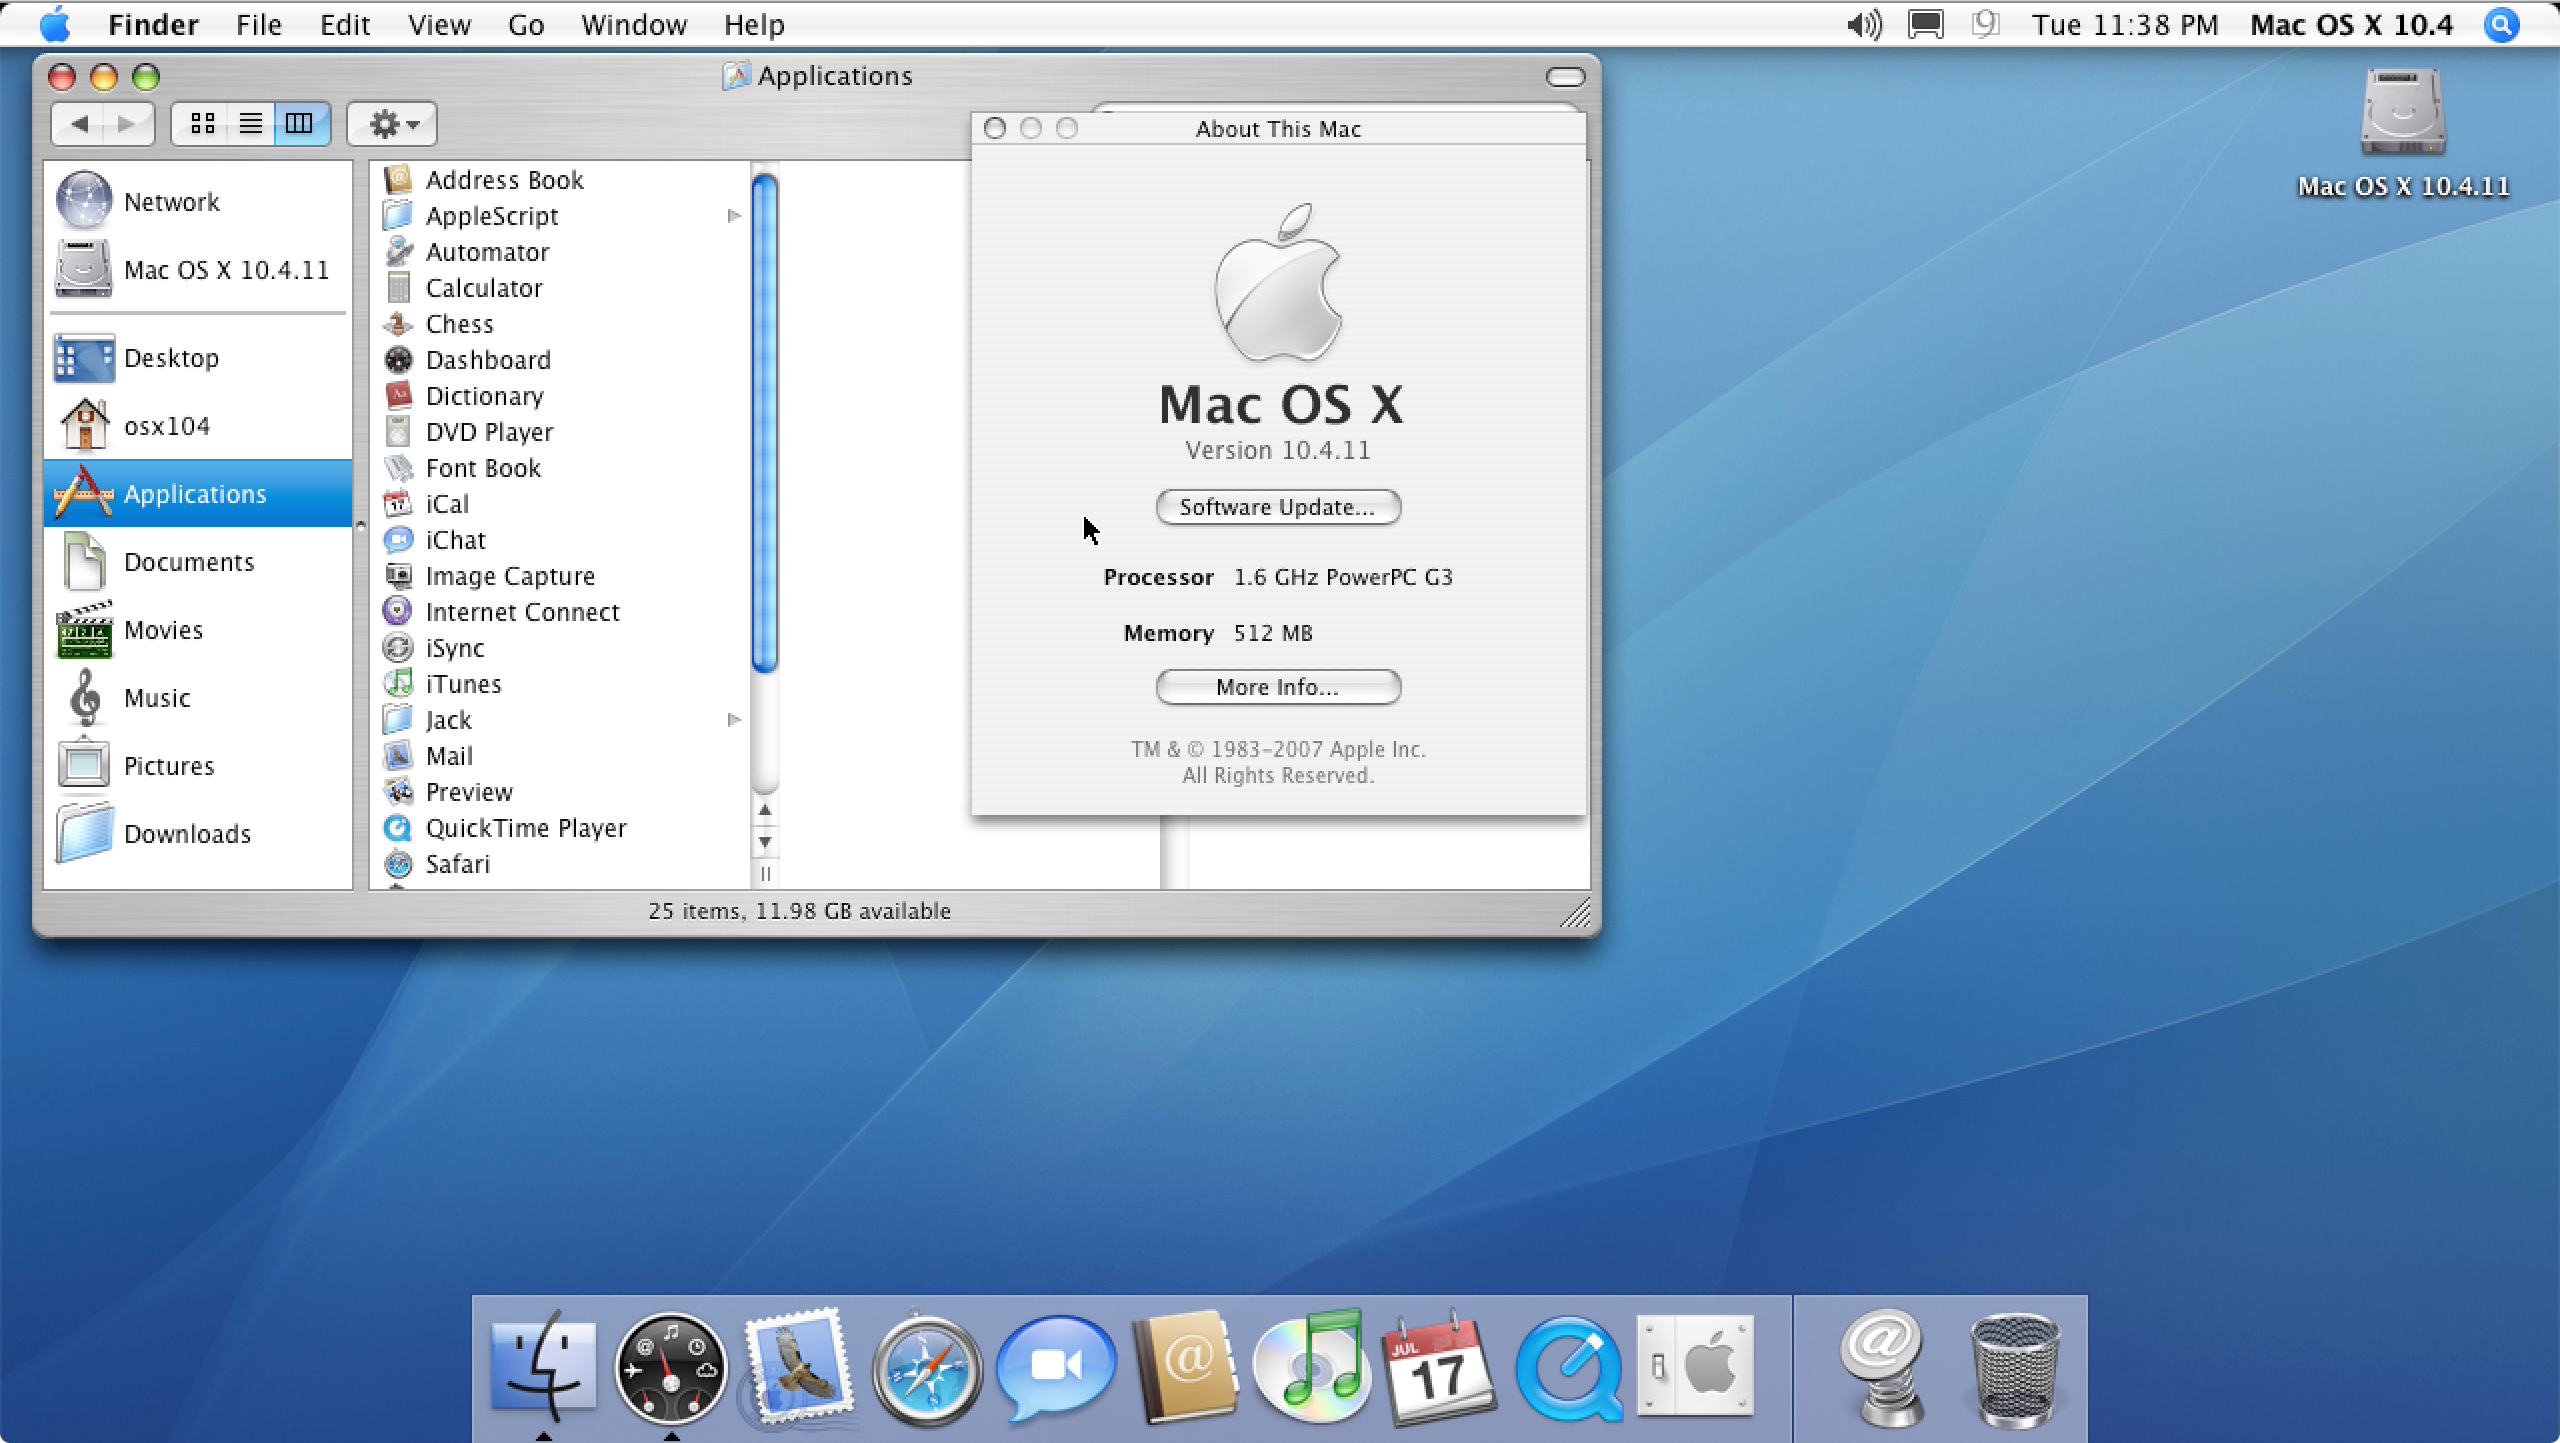 upgrade my mac os x 10.4.11 for free